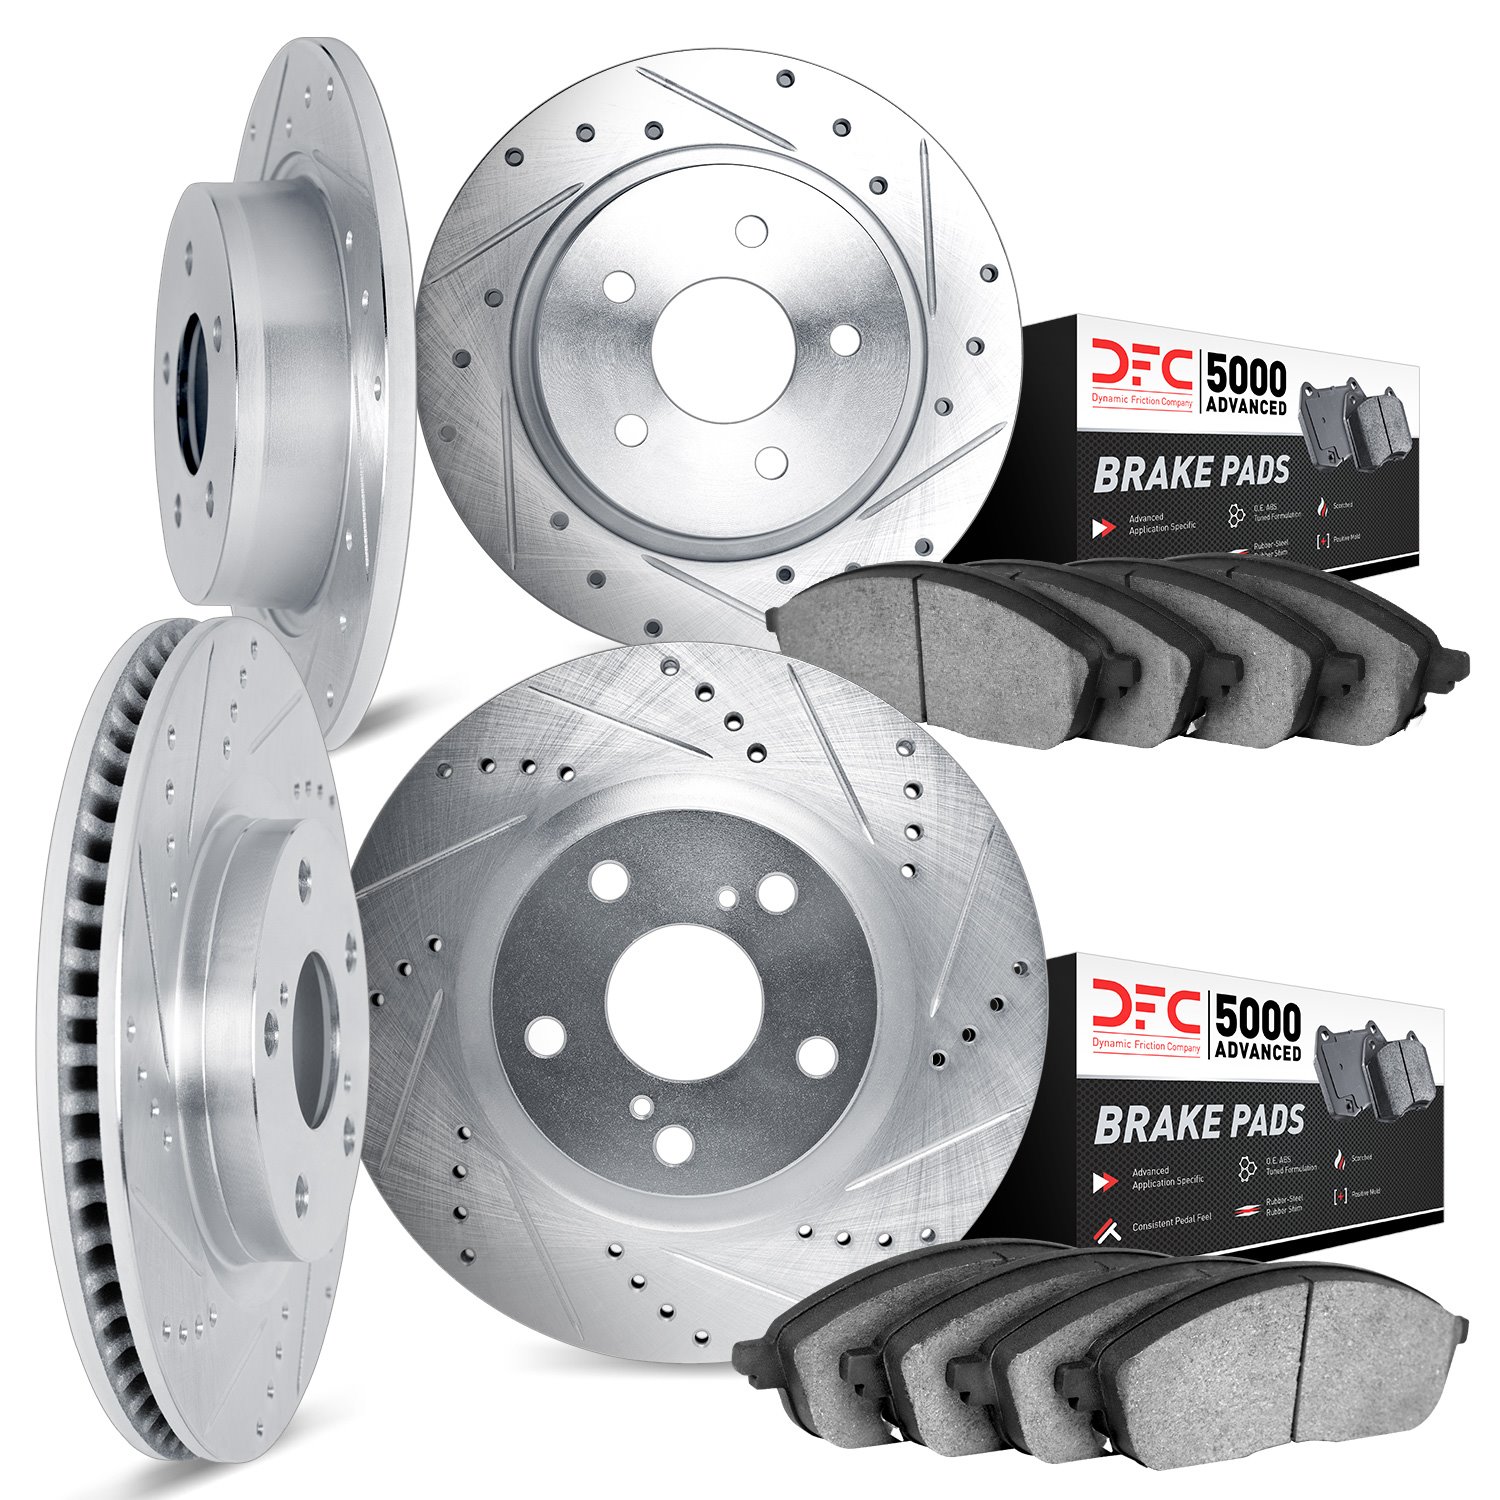 7504-43012 Drilled/Slotted Brake Rotors w/5000 Advanced Brake Pads Kit [Silver], 1990-1990 Mopar, Position: Front and Rear